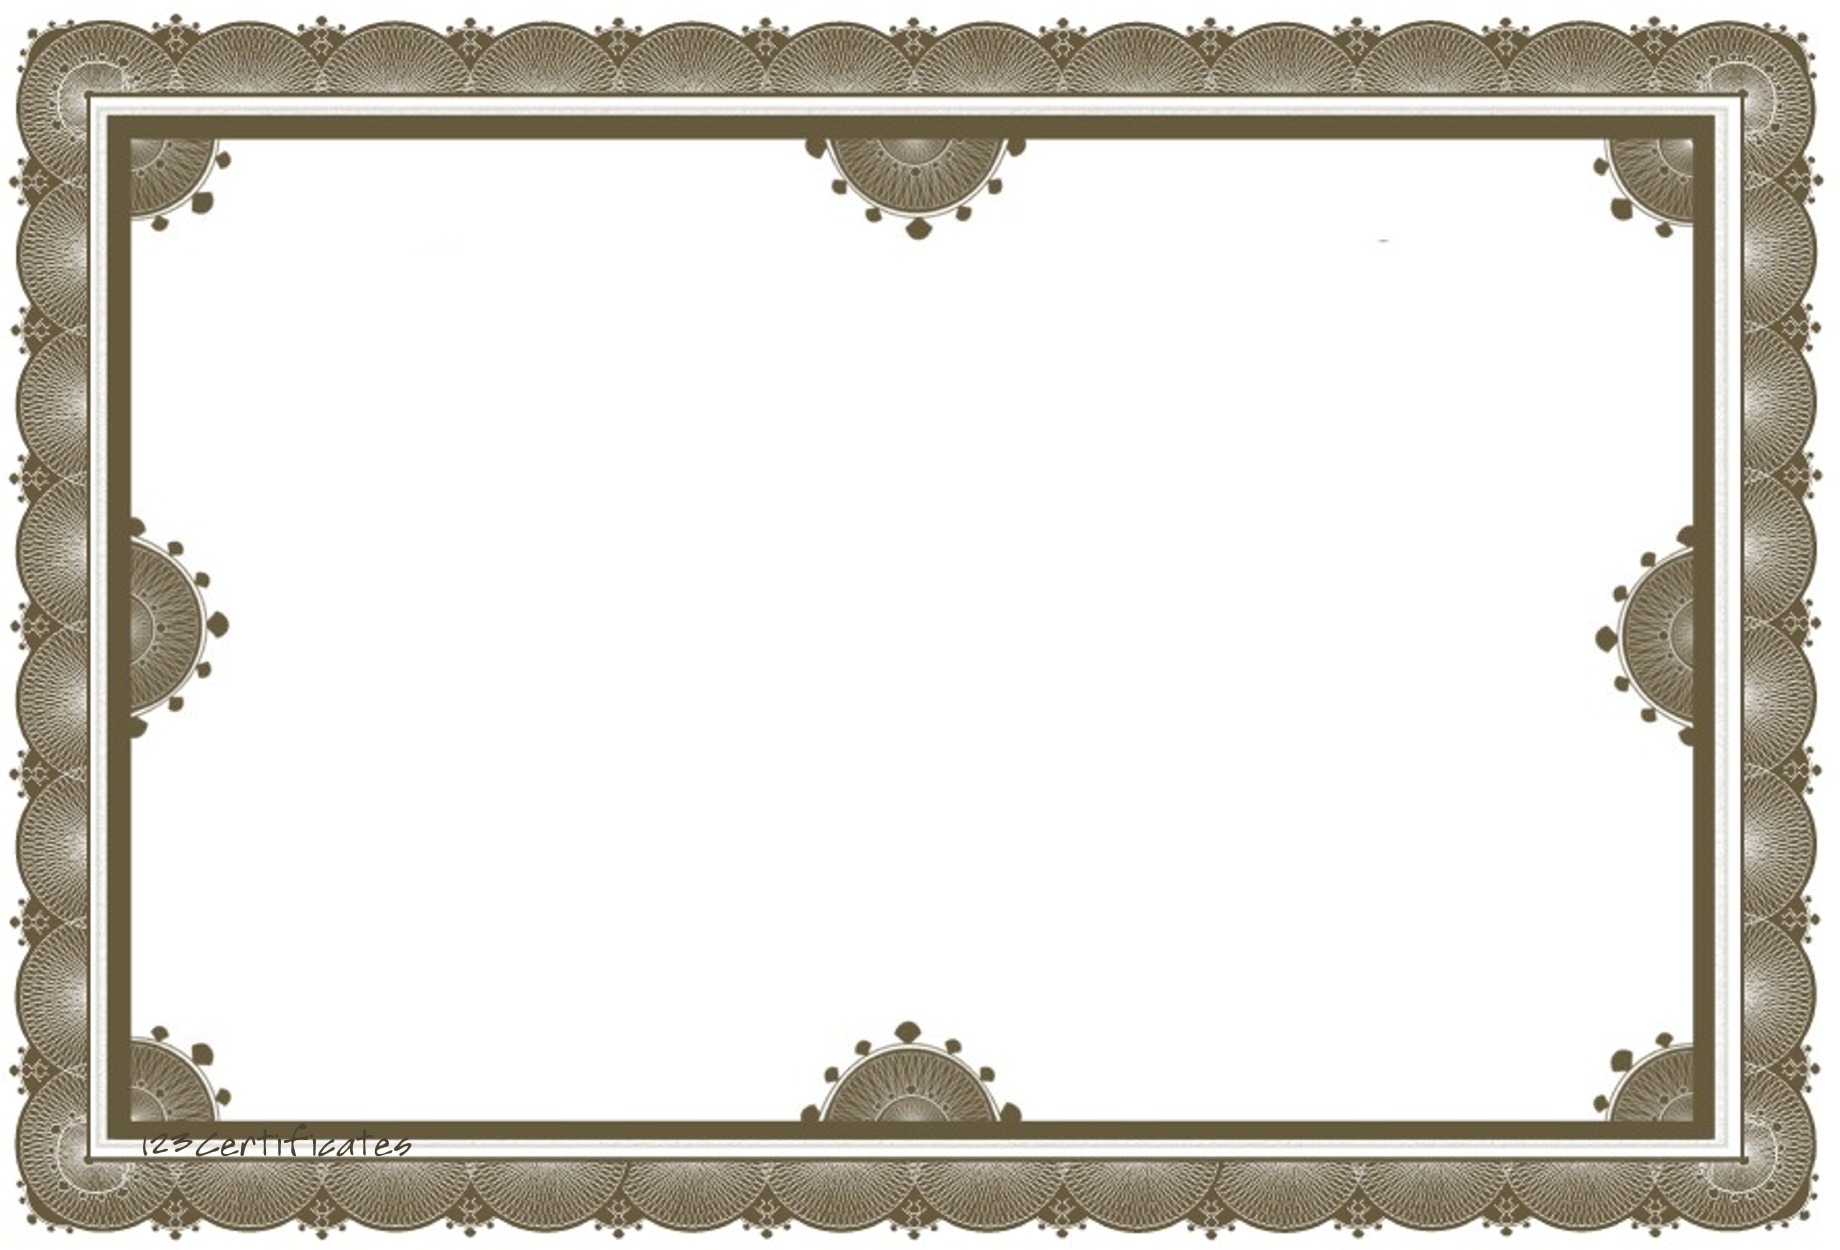 Free certificate borders to download, certificate templates for ...